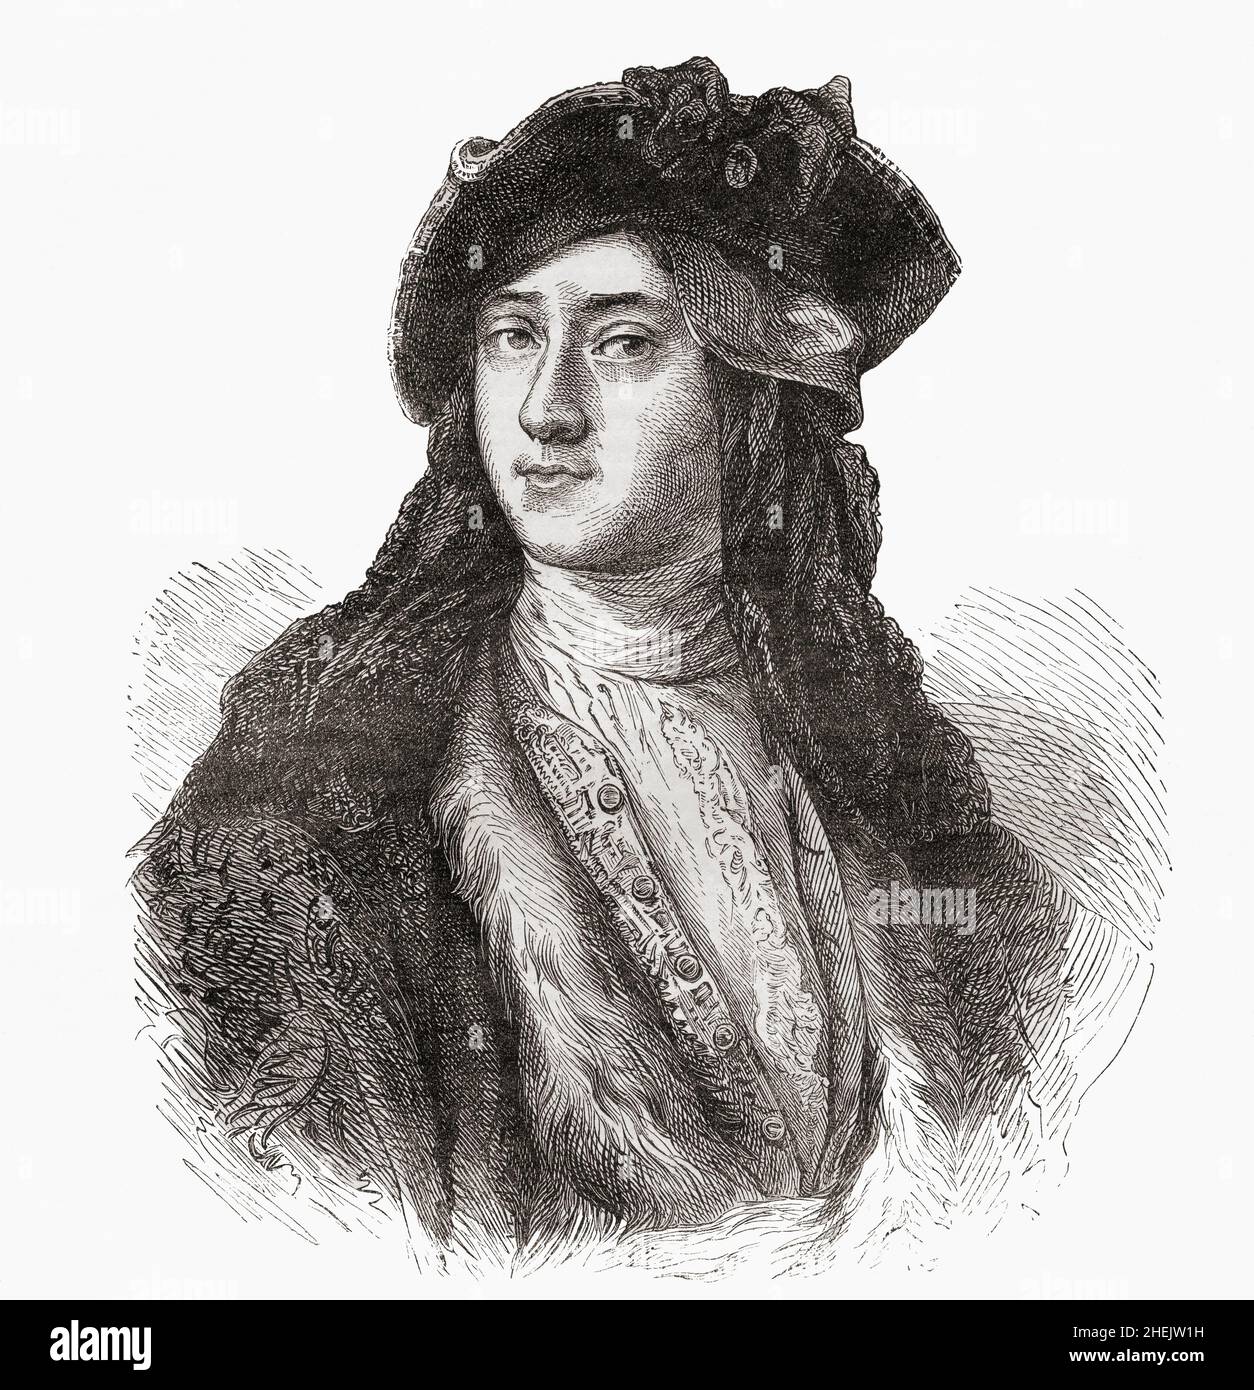 Horatio Walpole, 4th Earl of Orford, 1717 – 1797, aka Horace Walpole.  English writer, art historian, man of letters, antiquarian and Whig politician.  From Cassell's Illustrated History of England, published c.1890. Stock Photo